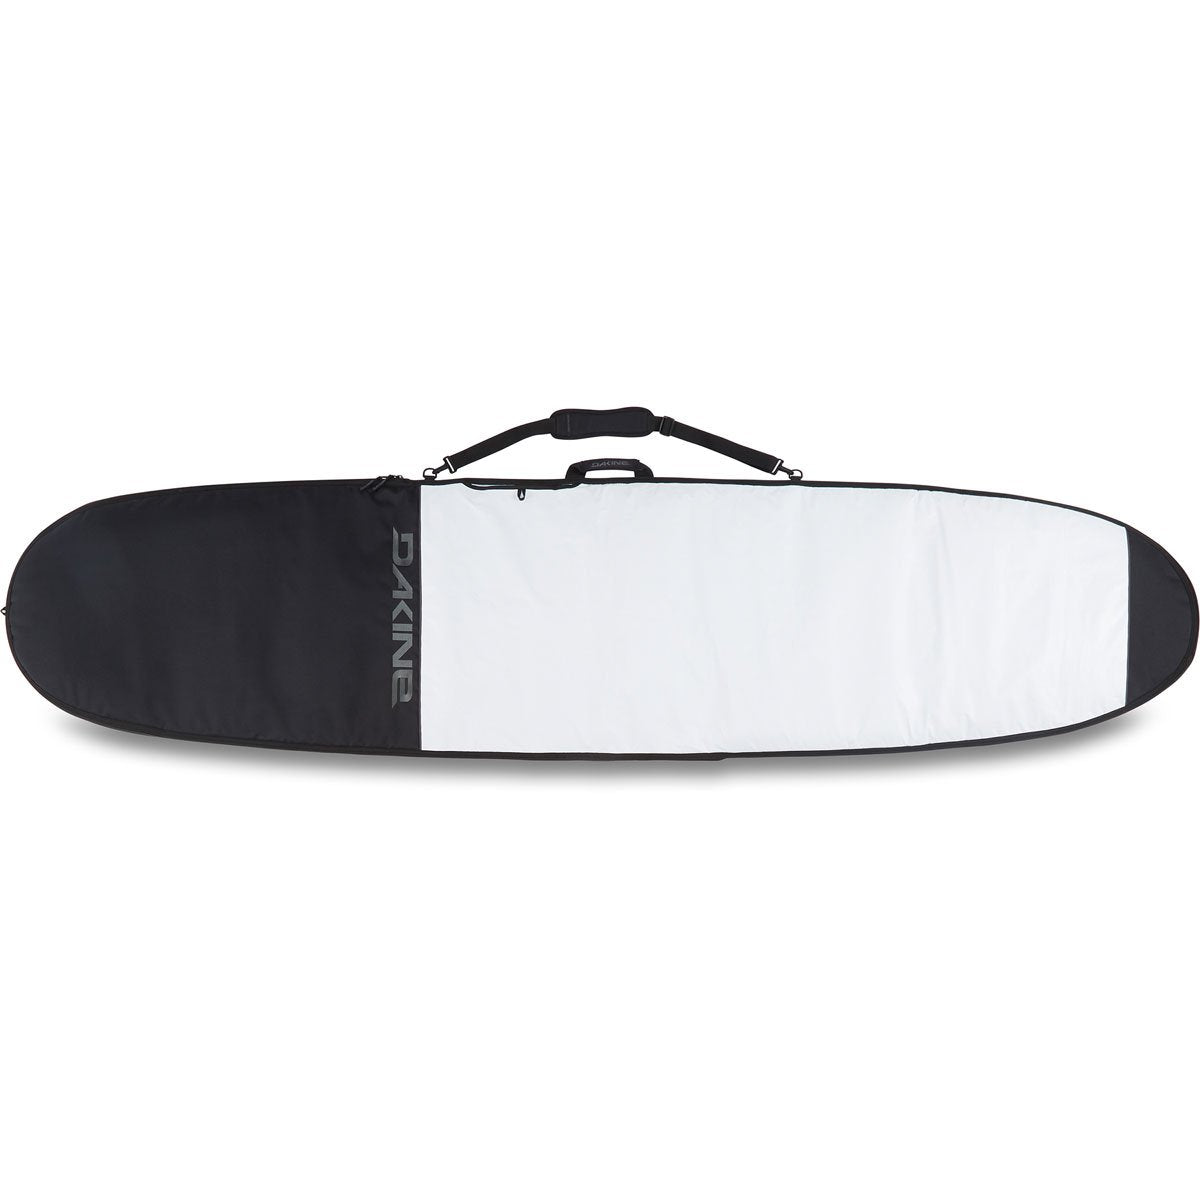  DAYLIGHT SURFBOARD BAG - NOSERIDER - A PADDED HYBRID BOARD BAG FOR STORAGE AND TRANSPORT